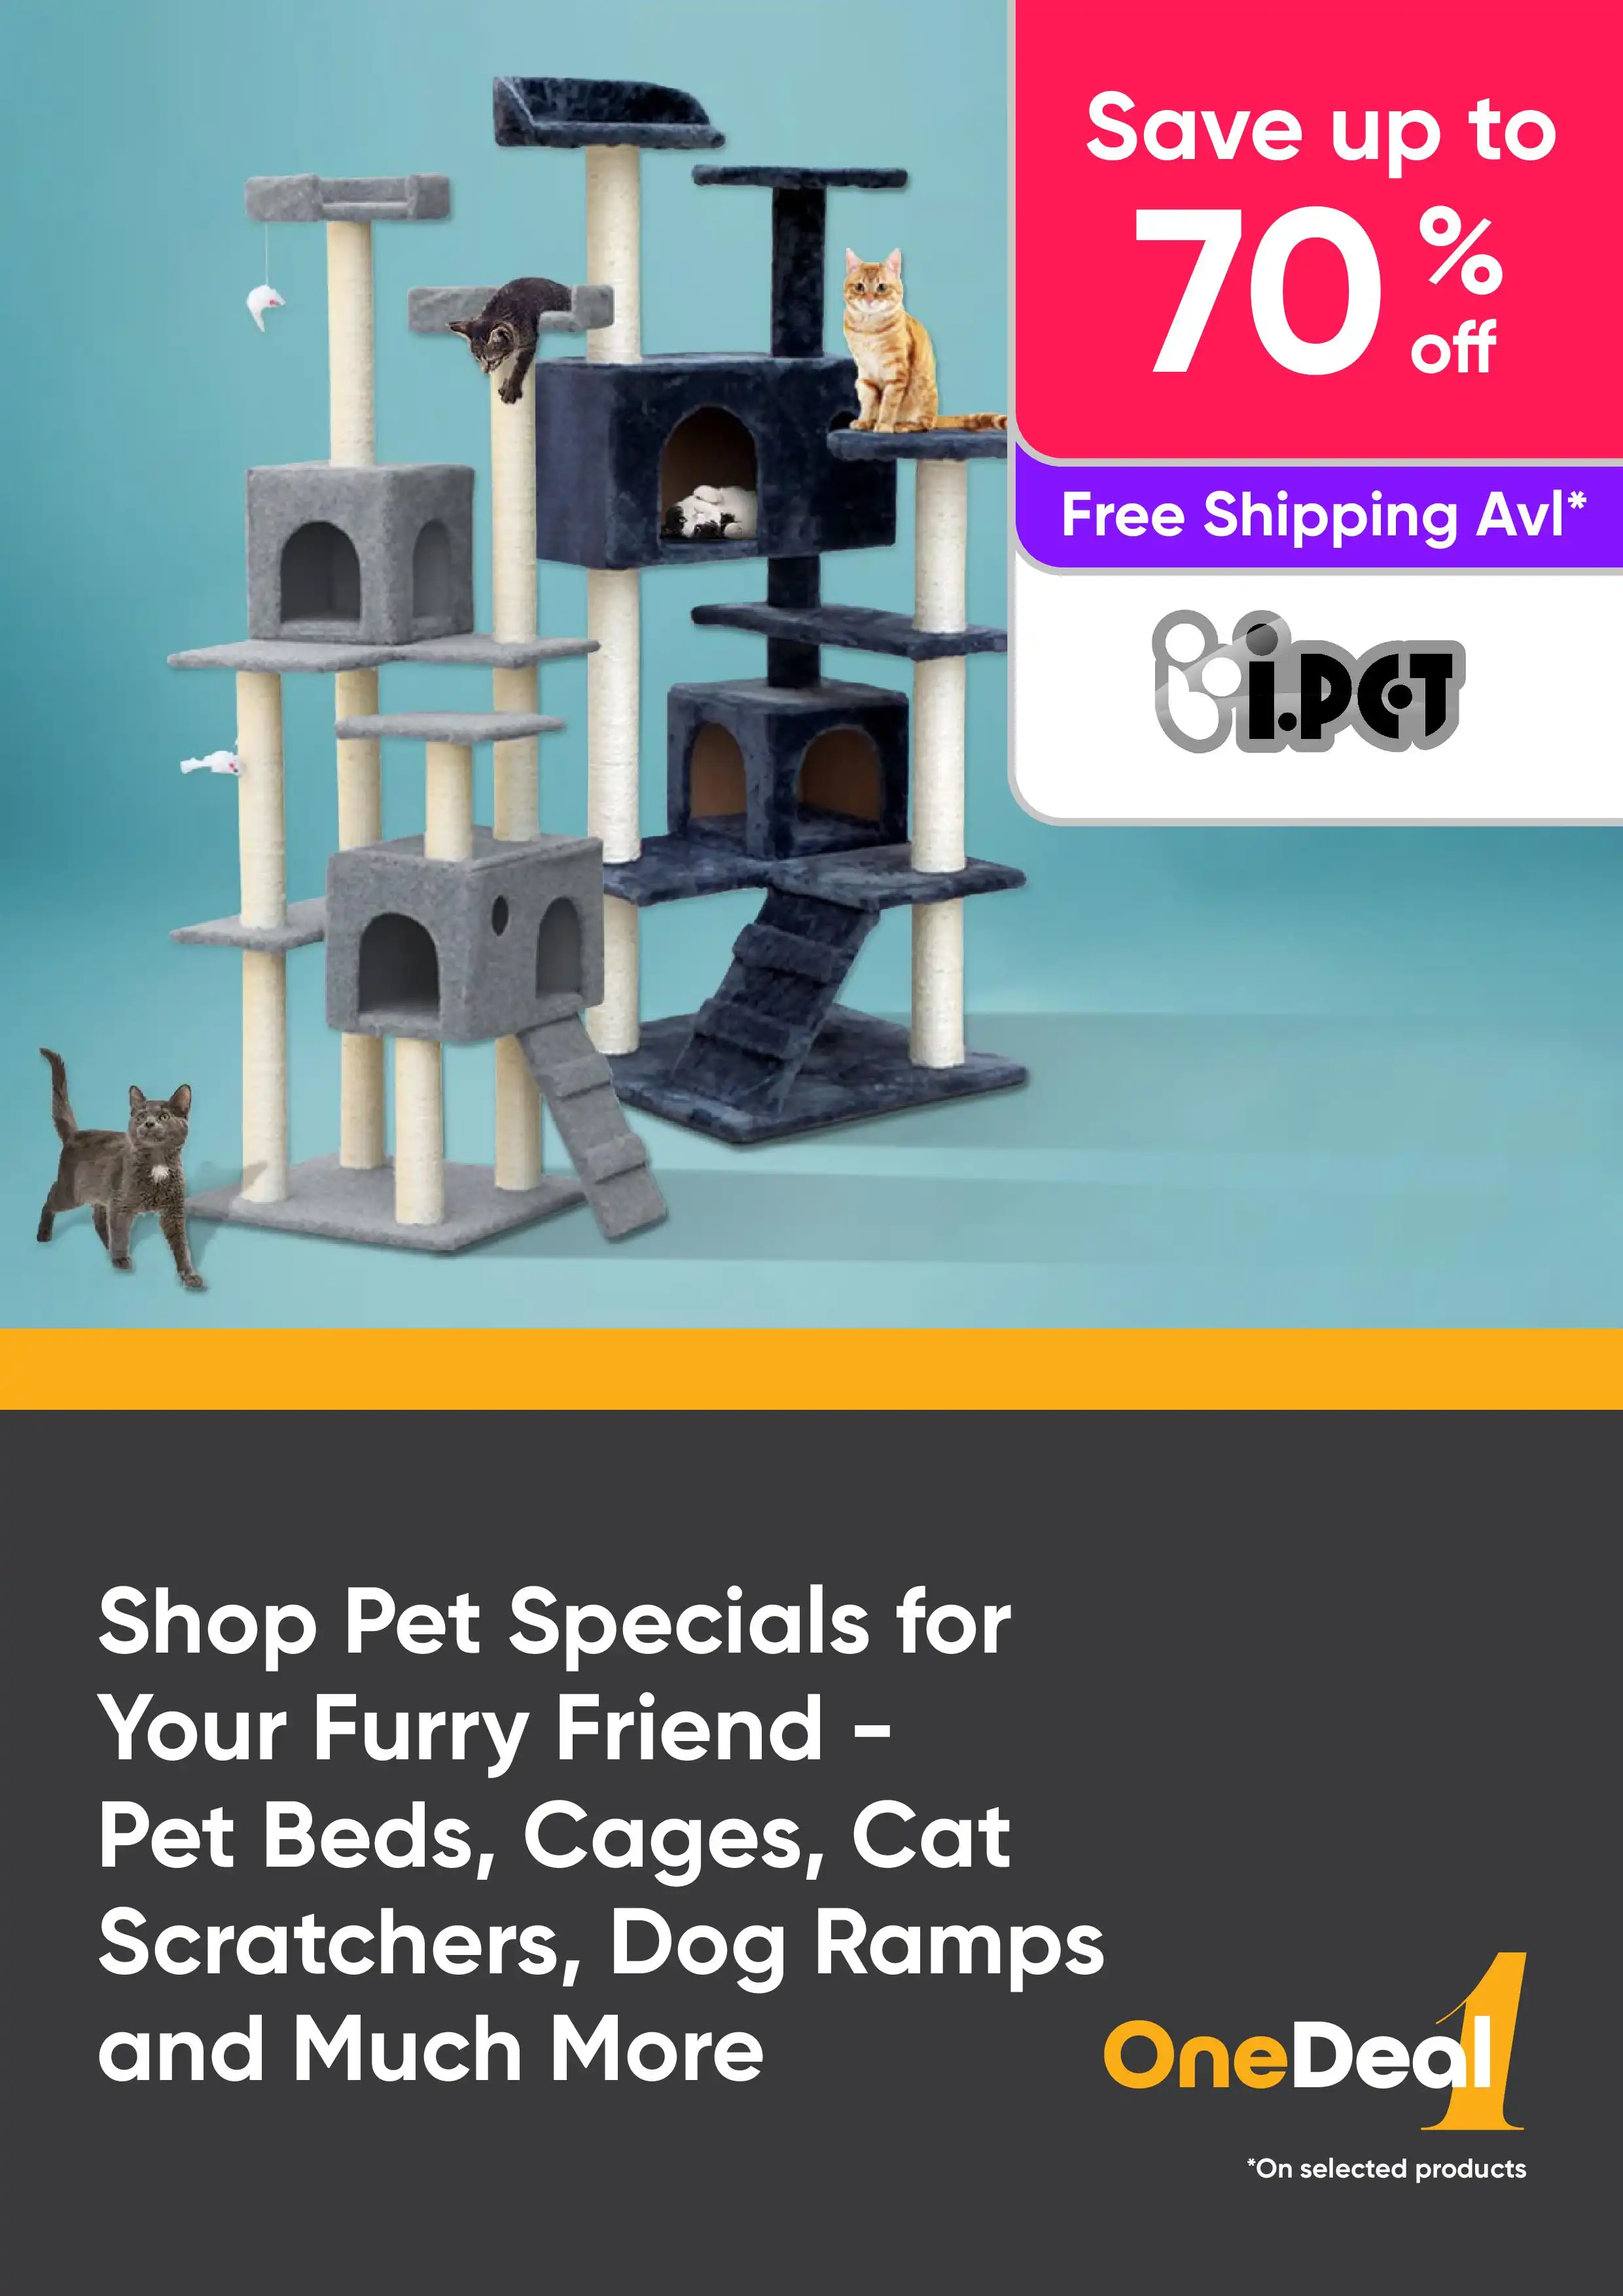 Shop Pet Specials for Your Furry Friend - Pet Beds, Cages, Cat Scratchers, Dog Ramps and Much More - Save up to 70% Off